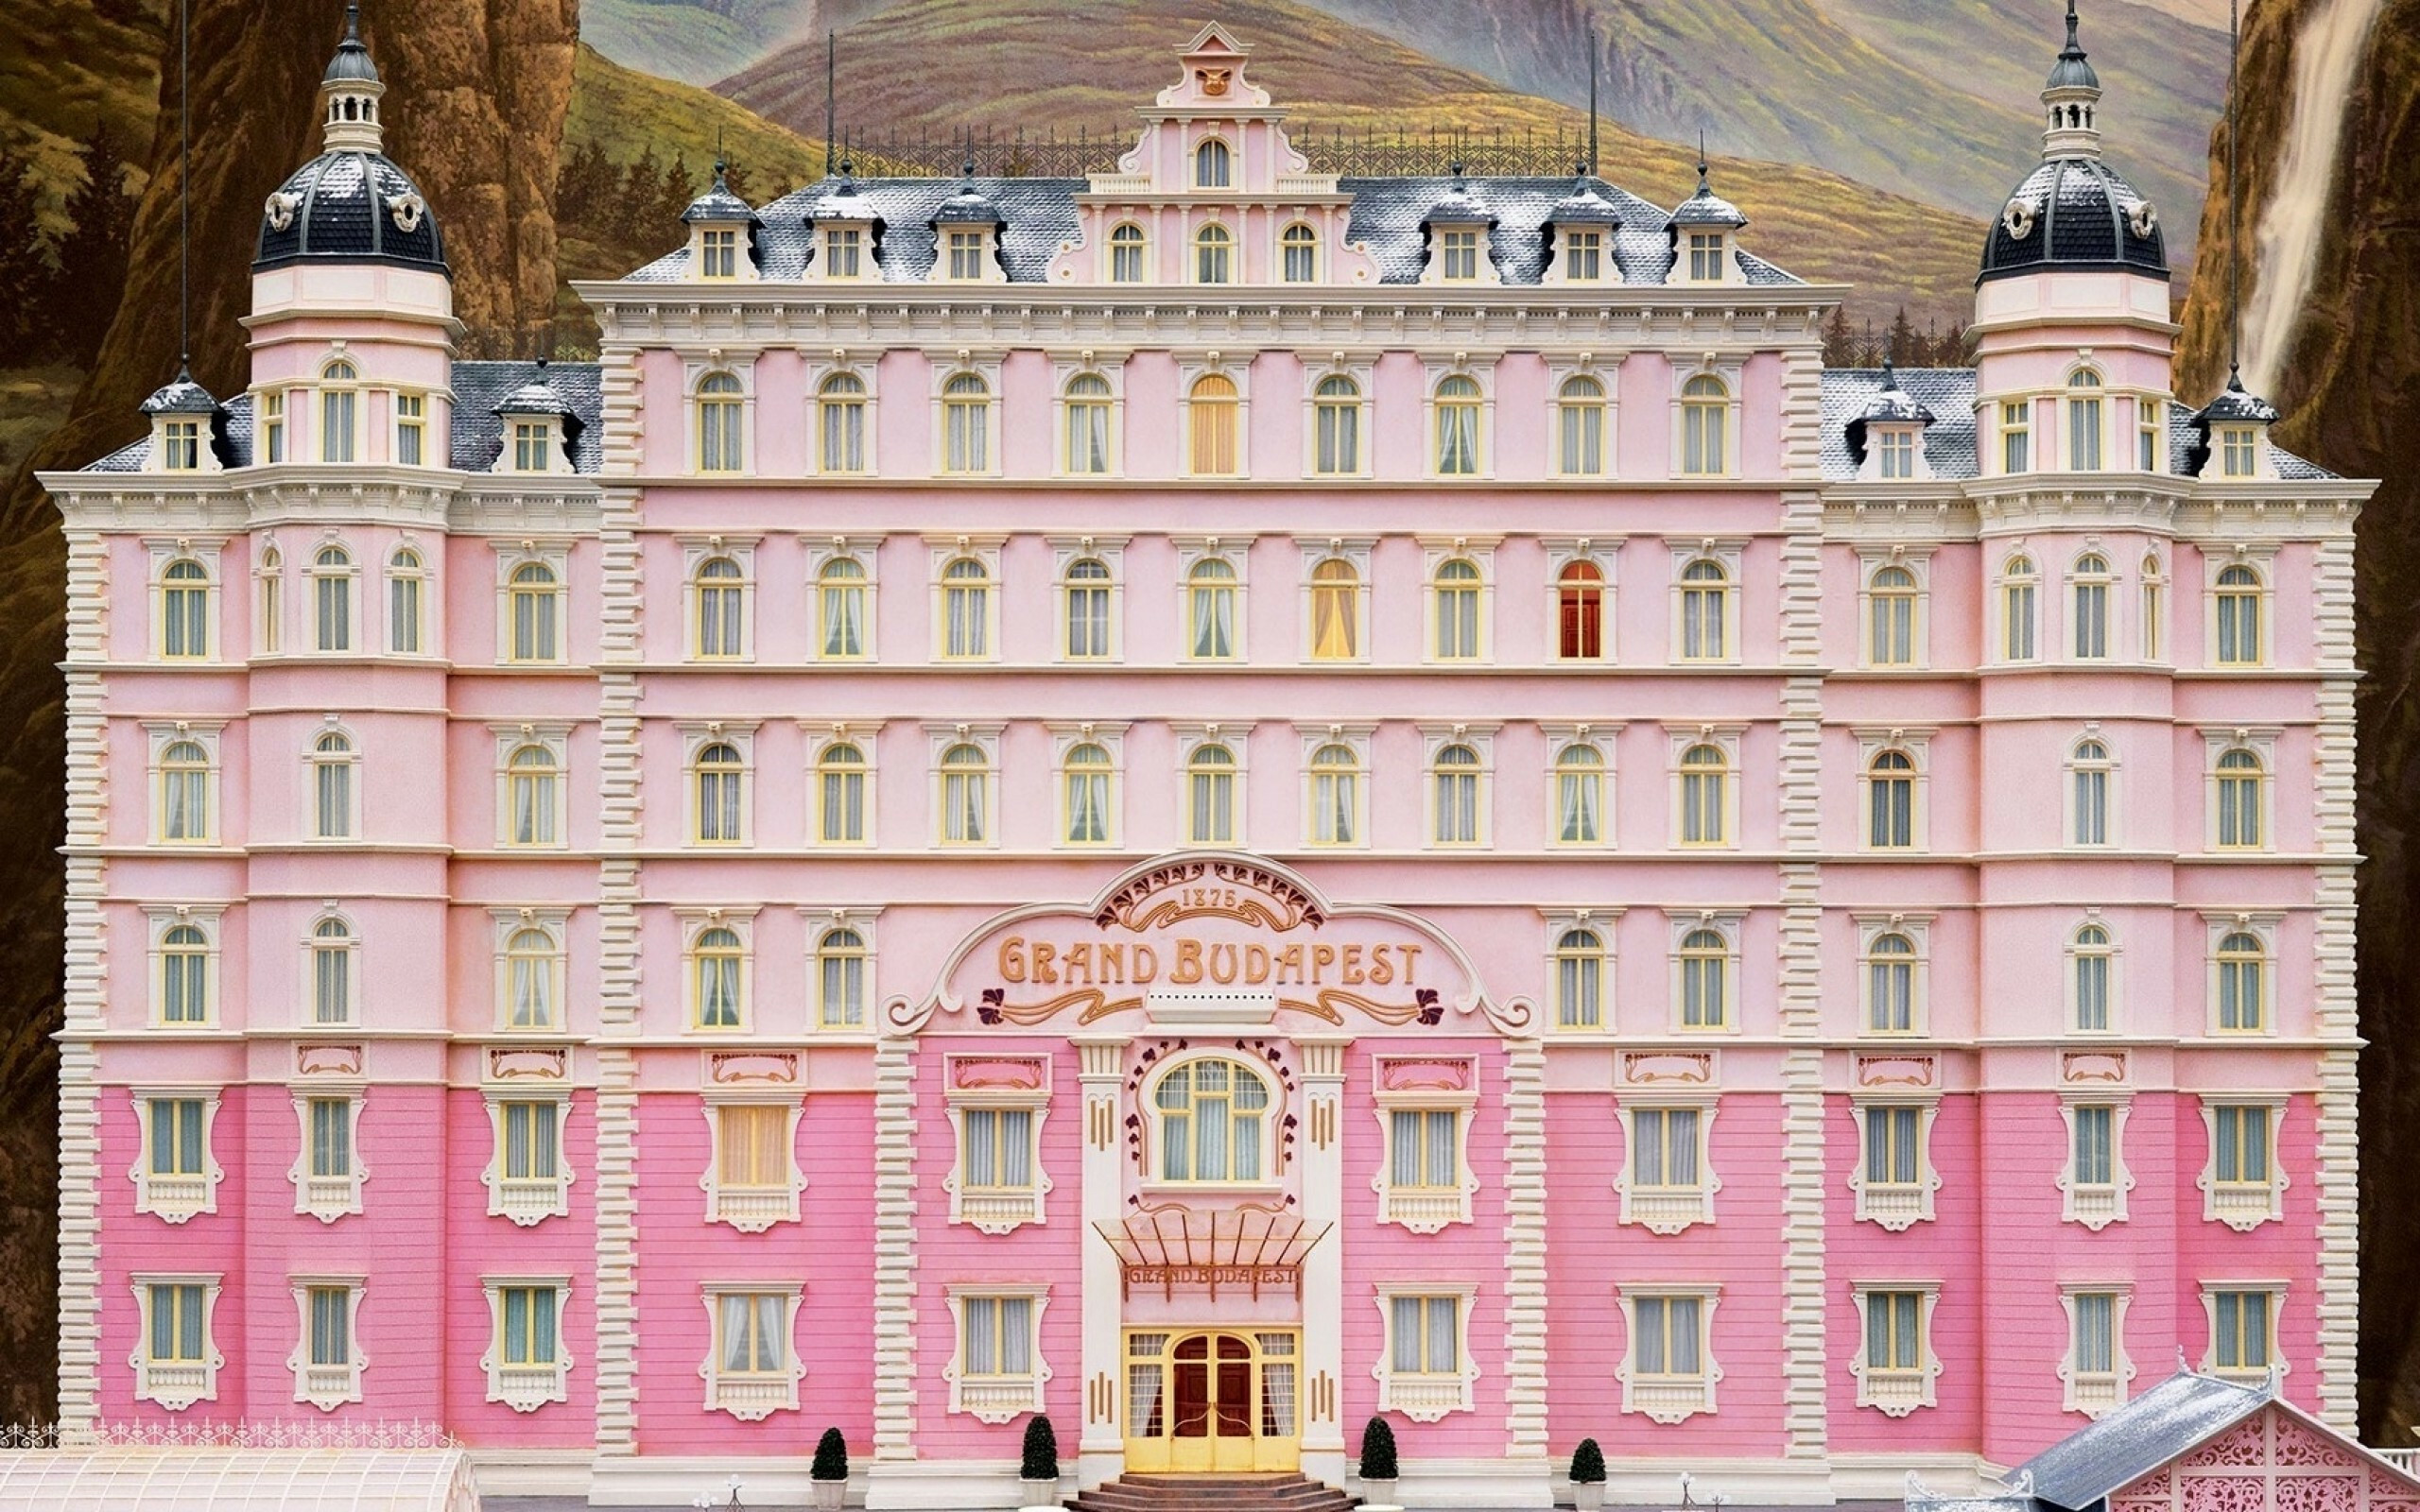 The Grand Budapest Hotel building, Download wallpapers for MacBook, Architectural marvel, Grandeur personified, 2560x1600 HD Desktop